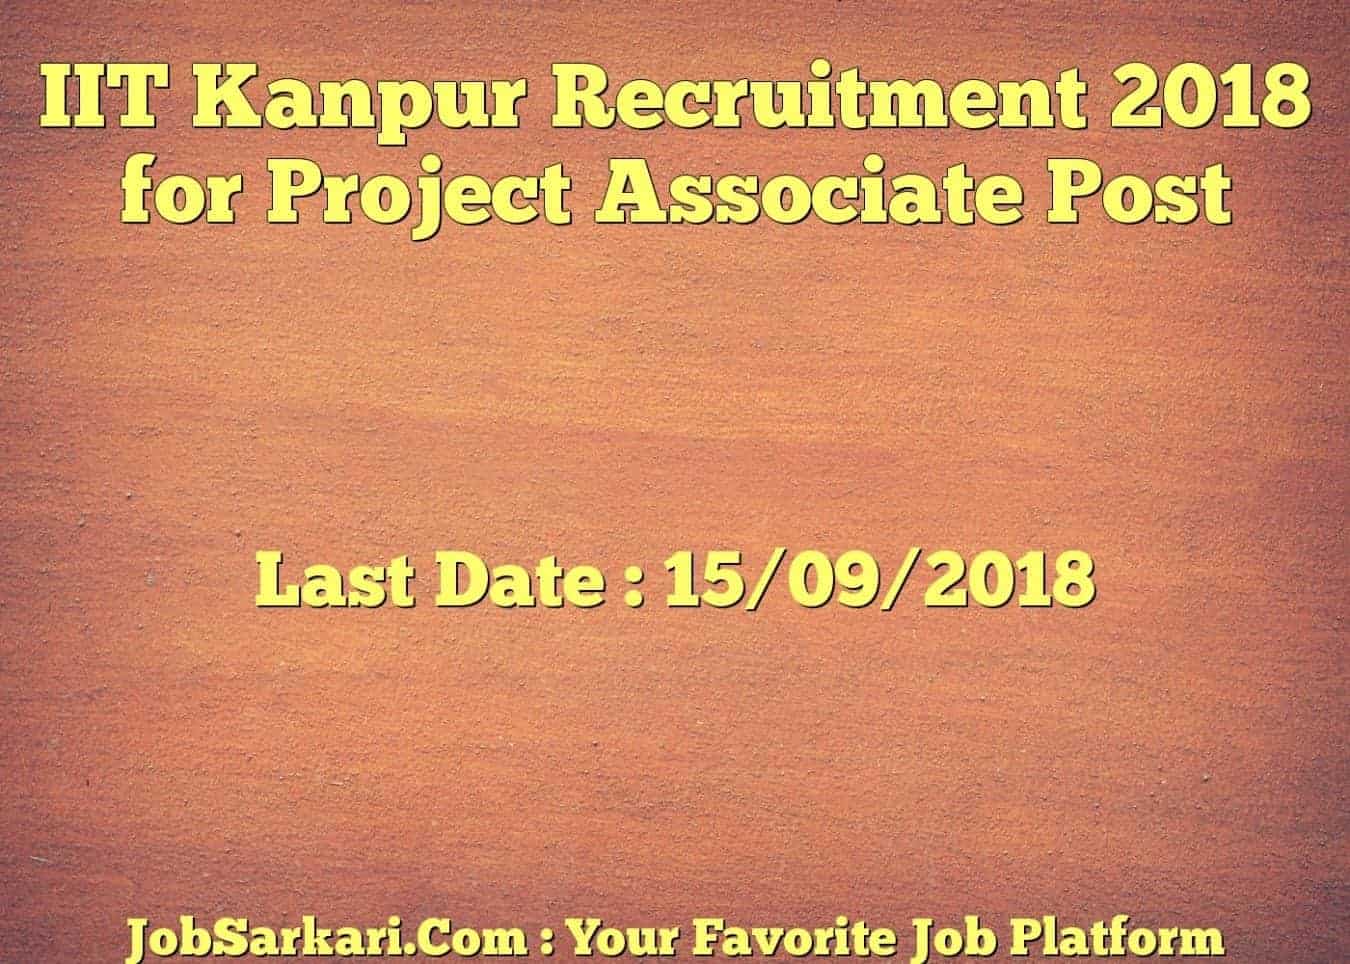 IIT Kanpur Recruitment 2018 for Project Associate Post